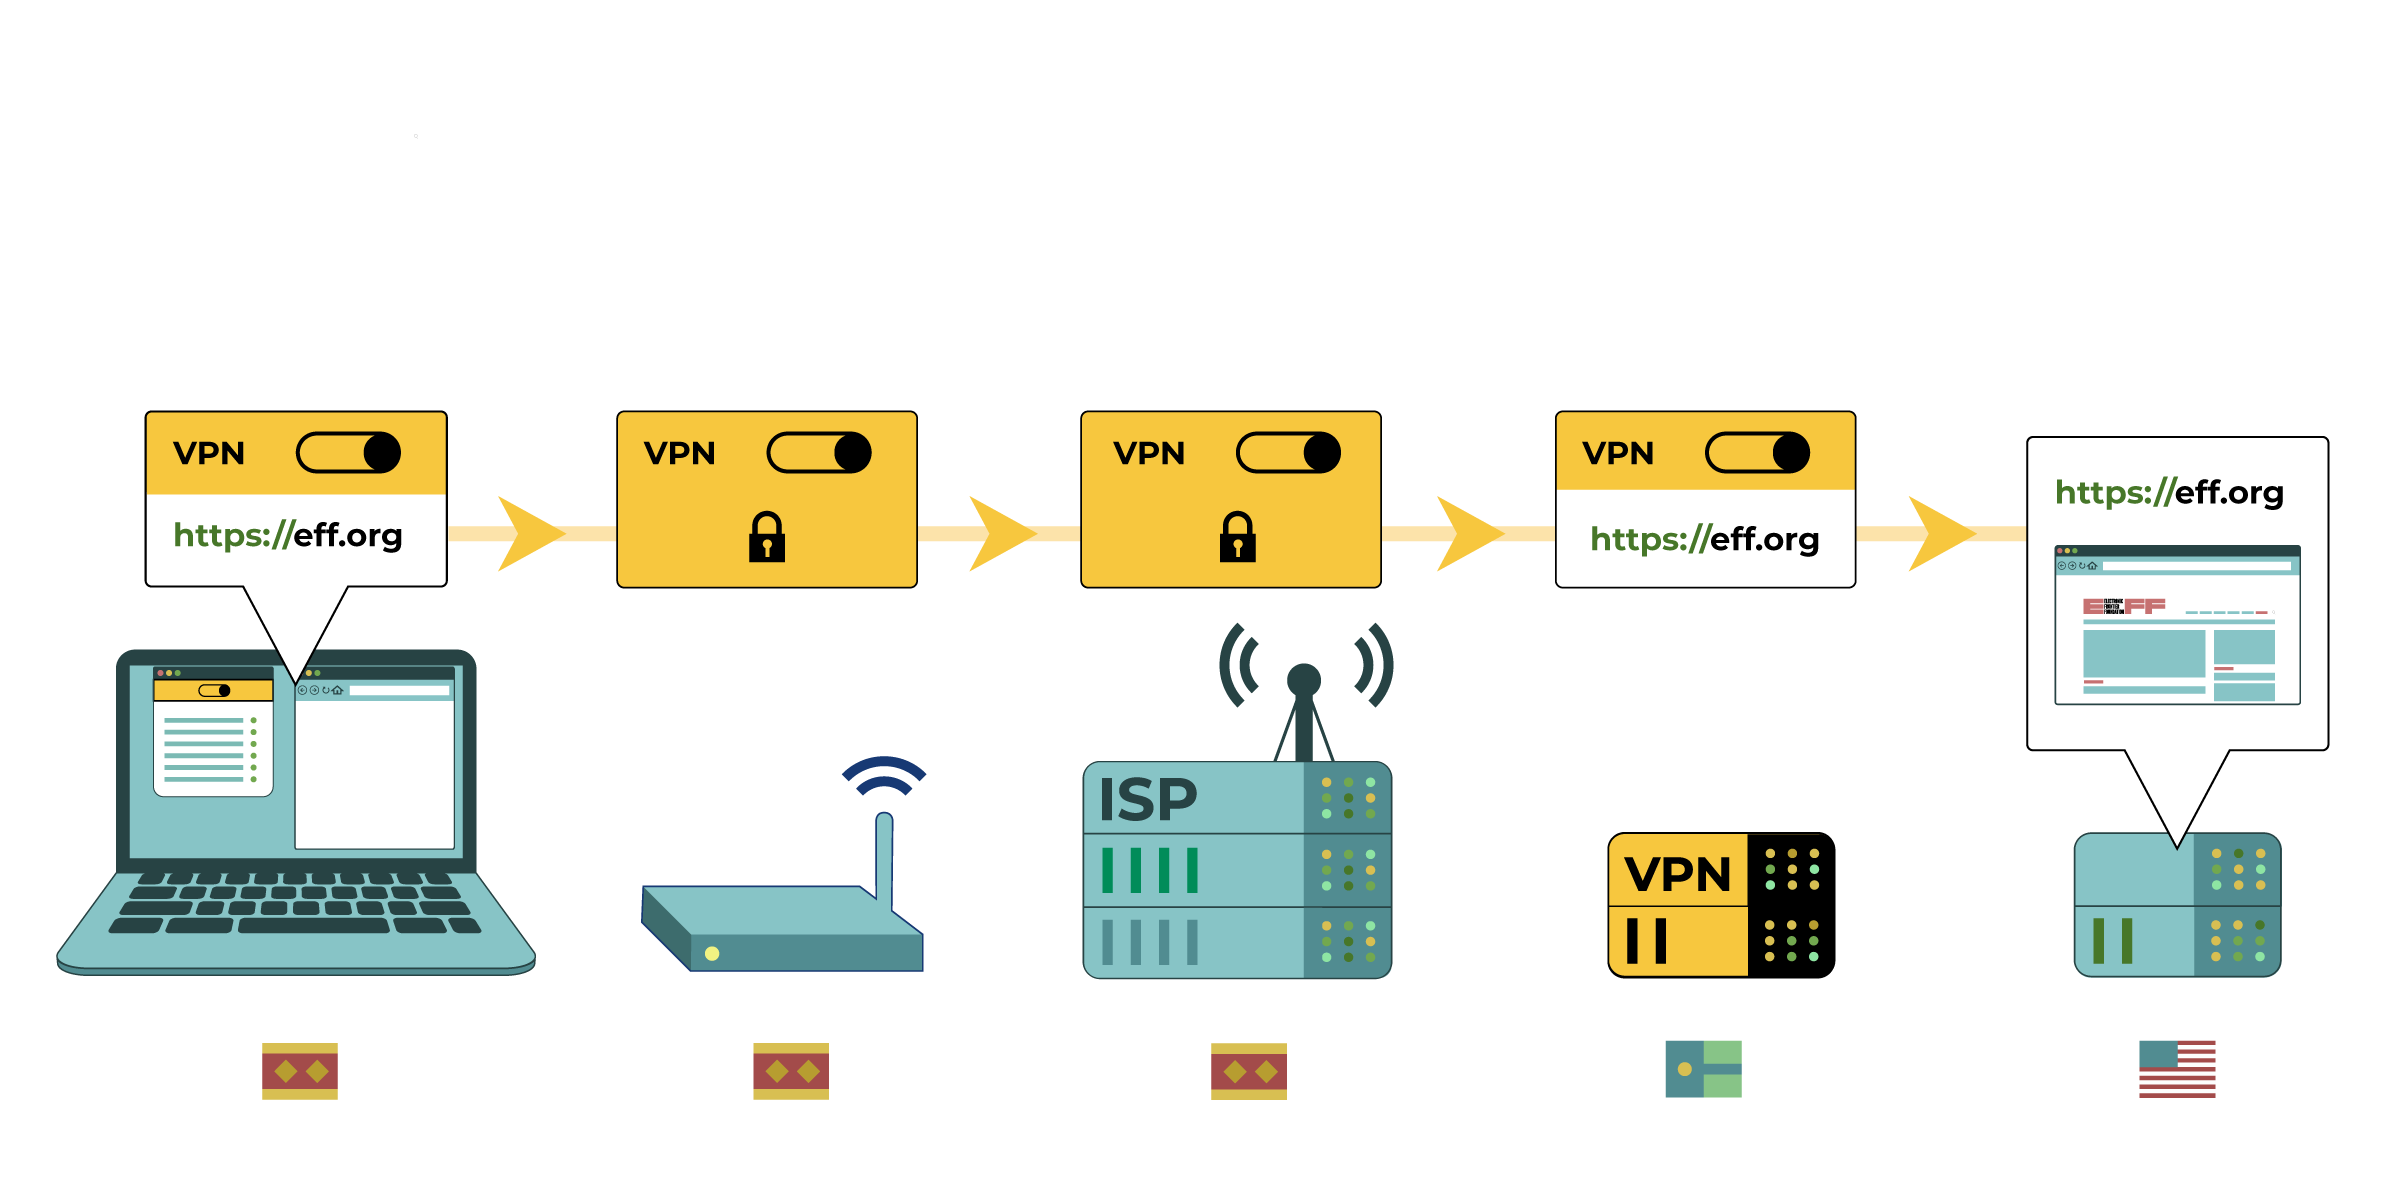 In this diagram, the computer uses a VPN, which encrypts its traffic and connects to eff.org. The network router and Internet Service Provider might see that the computer is using a VPN, but the data is encrypted. The Internet Service Provider routes the connection to the VPN server in another country. This VPN then connects to the eff.org website.